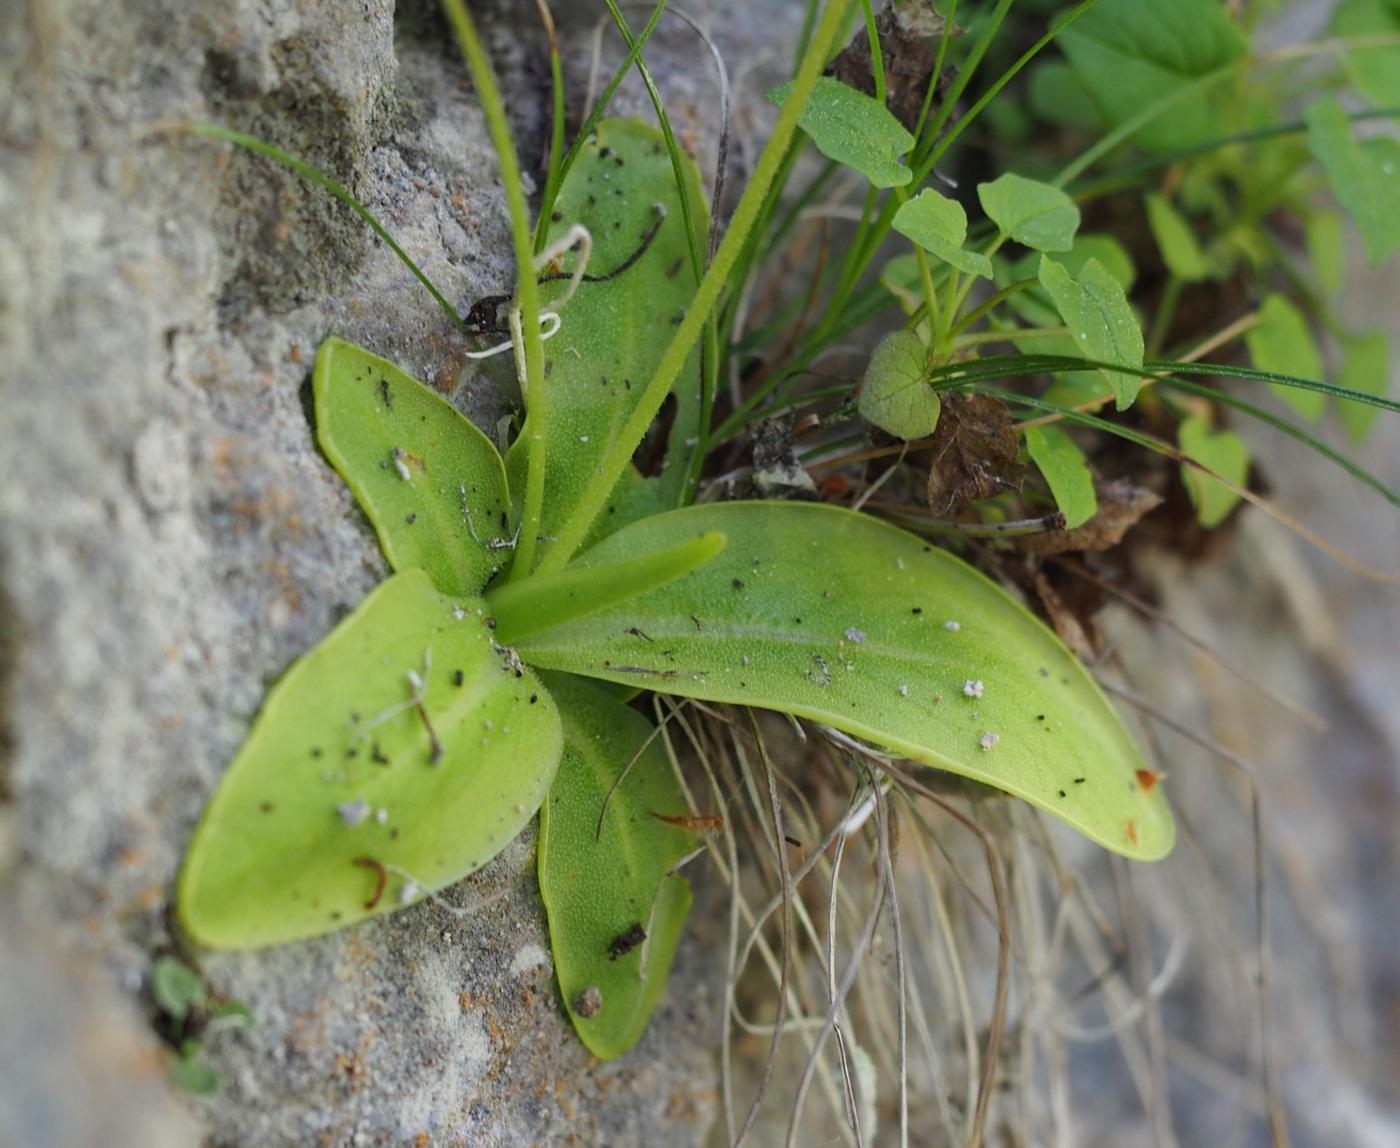 Butterwort [of the causses] leaf